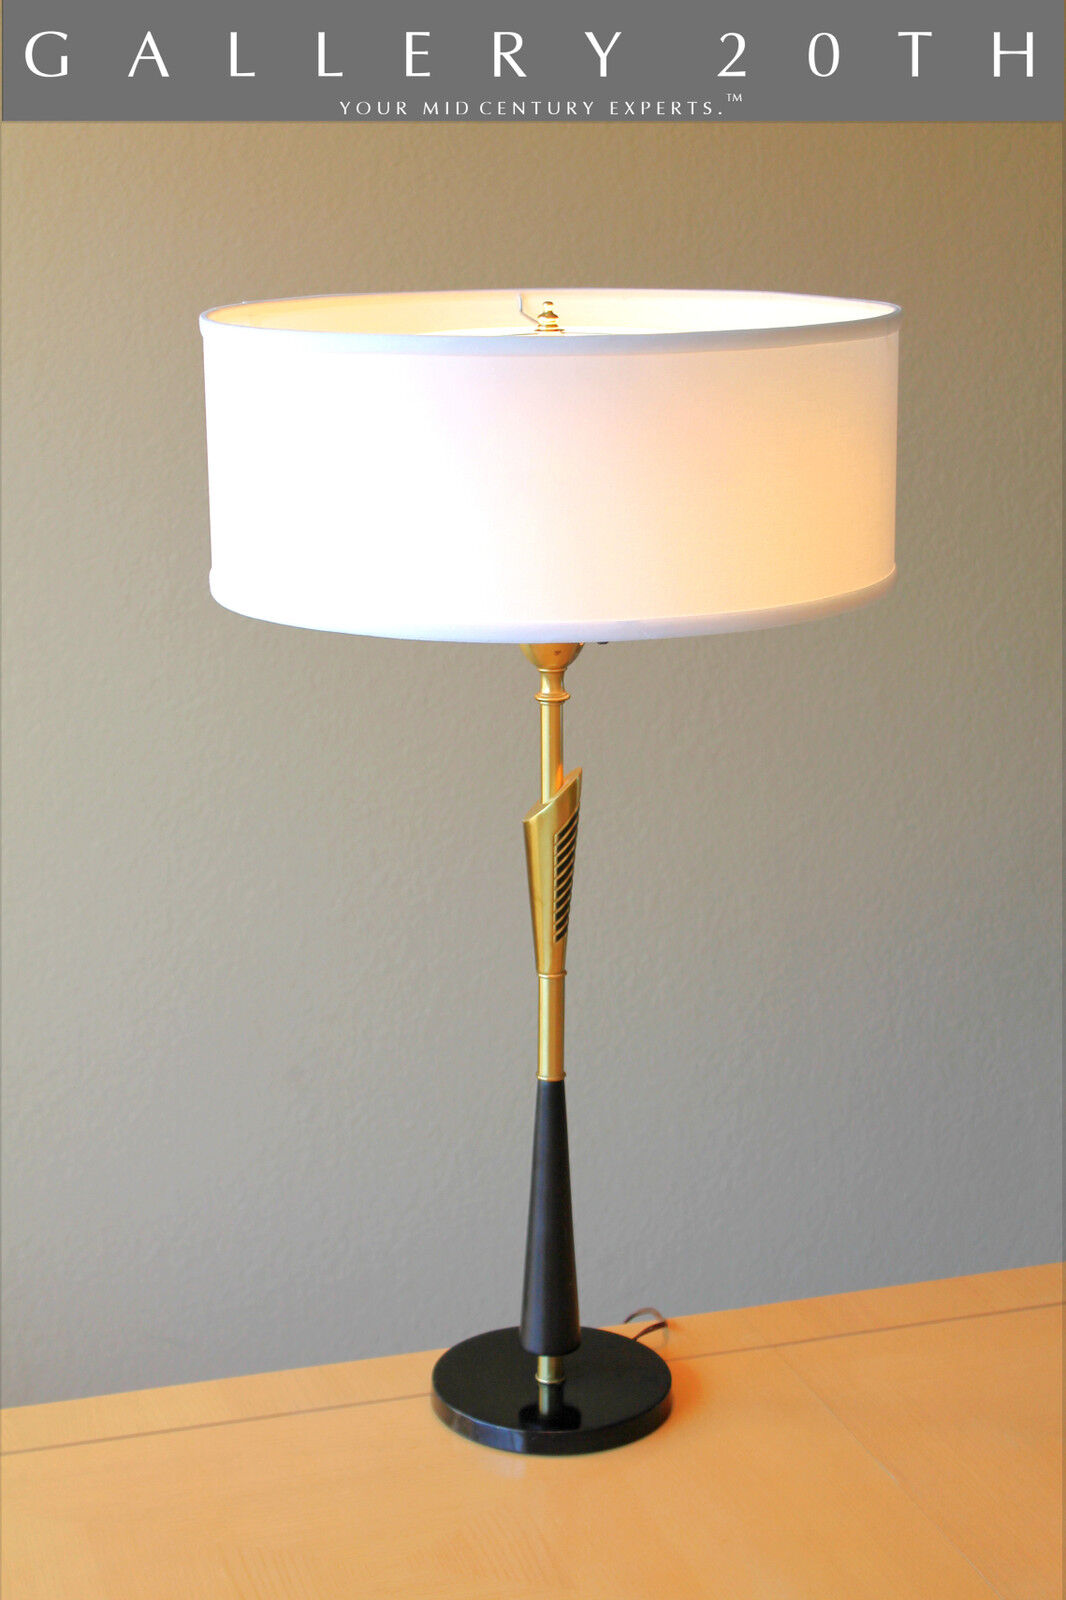 LUXURY MID CENTURY MODERN REMBRANDT TABLE LAMP Atomic Vtg 50s 60s Brass Eames